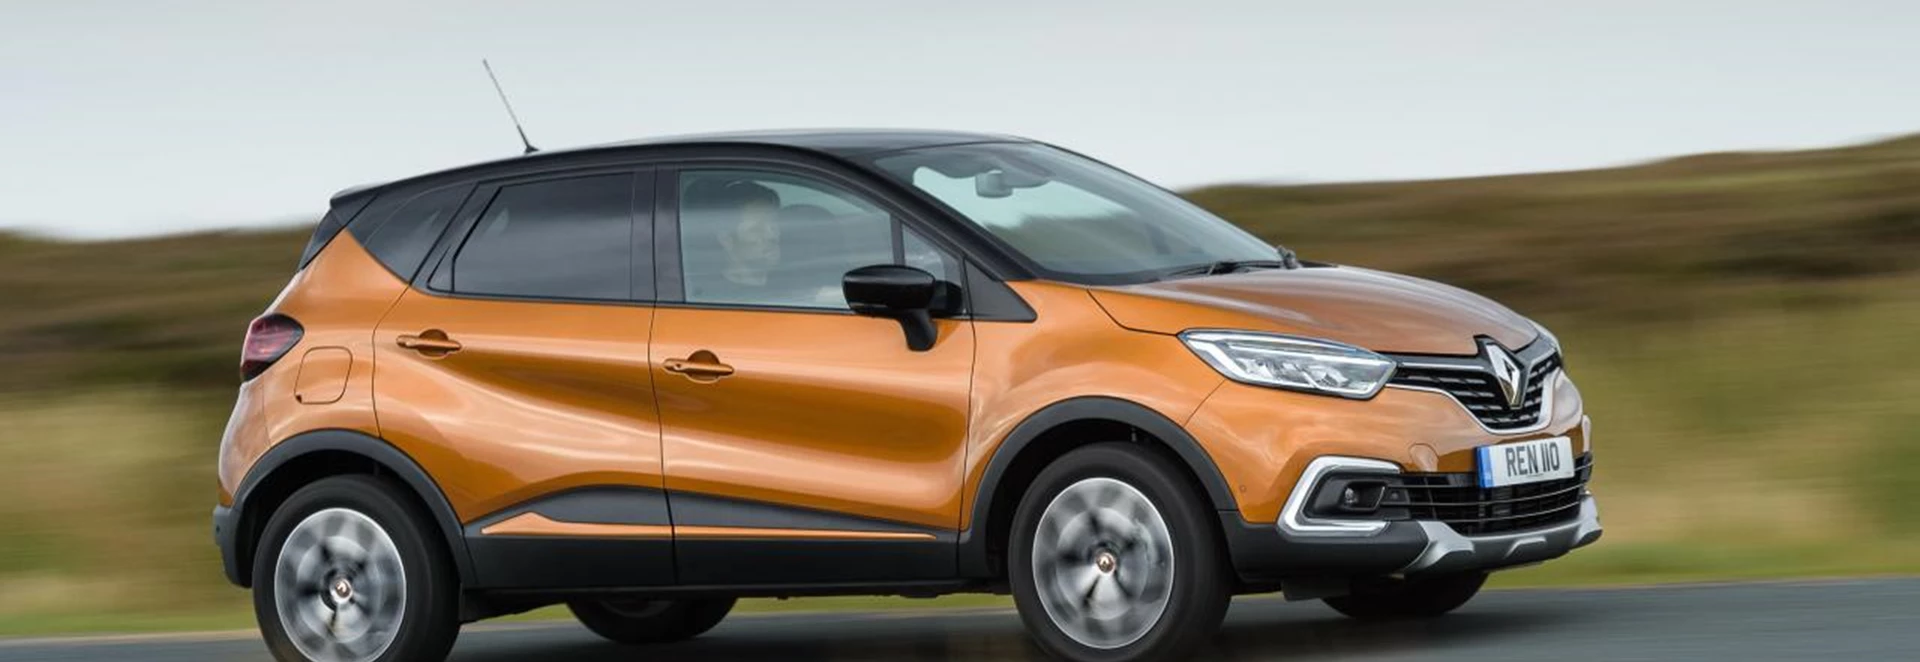 Renault Captur tops small crossover sales in Europe